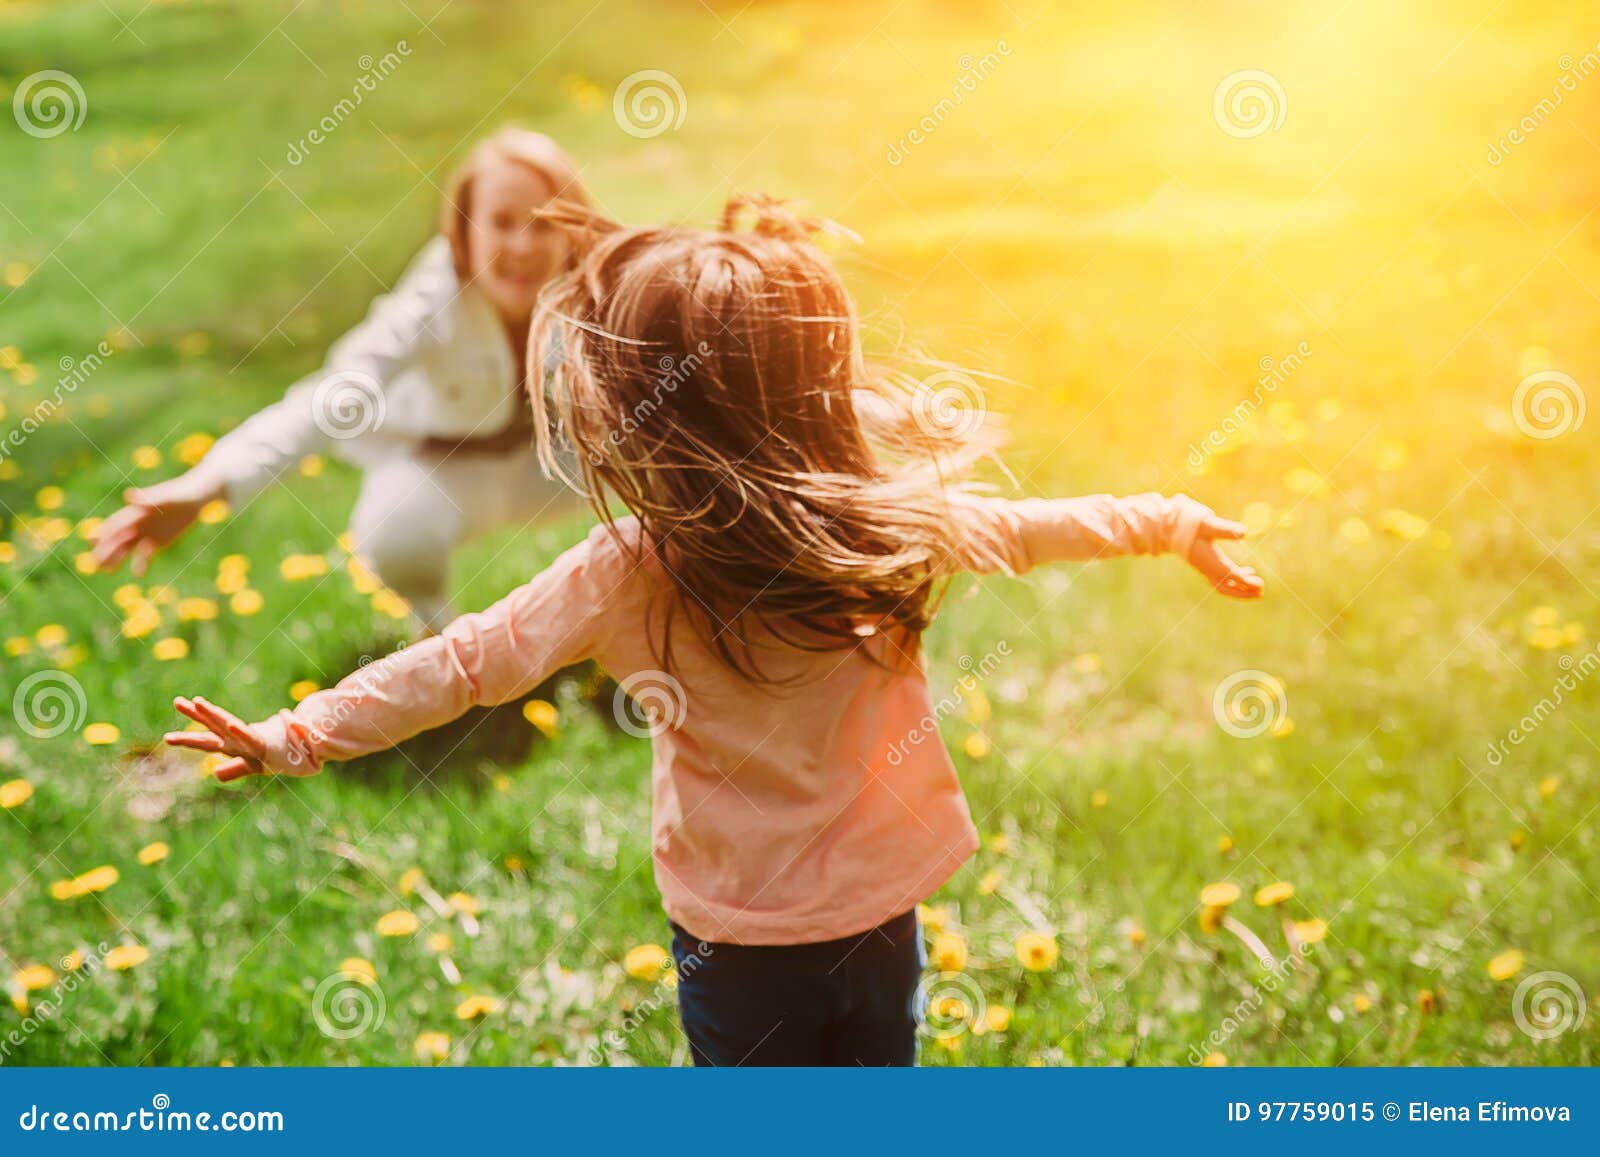 child running into mother`s hands to hug her. family having fun in the park.